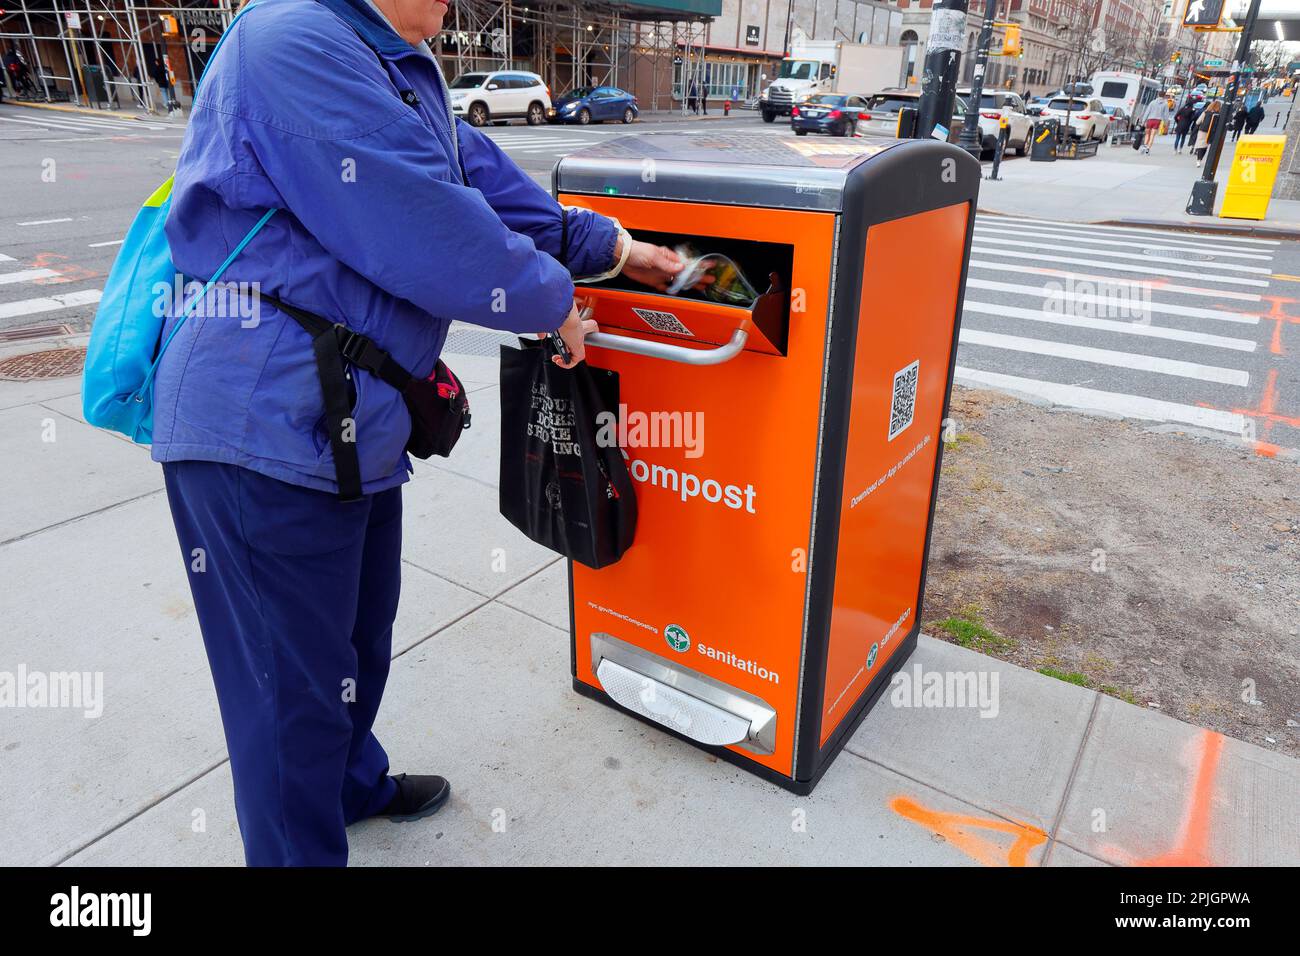 A person deposits food scraps into a NYC Smart Compost bin. The recycling containers require the NYC Smart Compost app to unlock Stock Photo